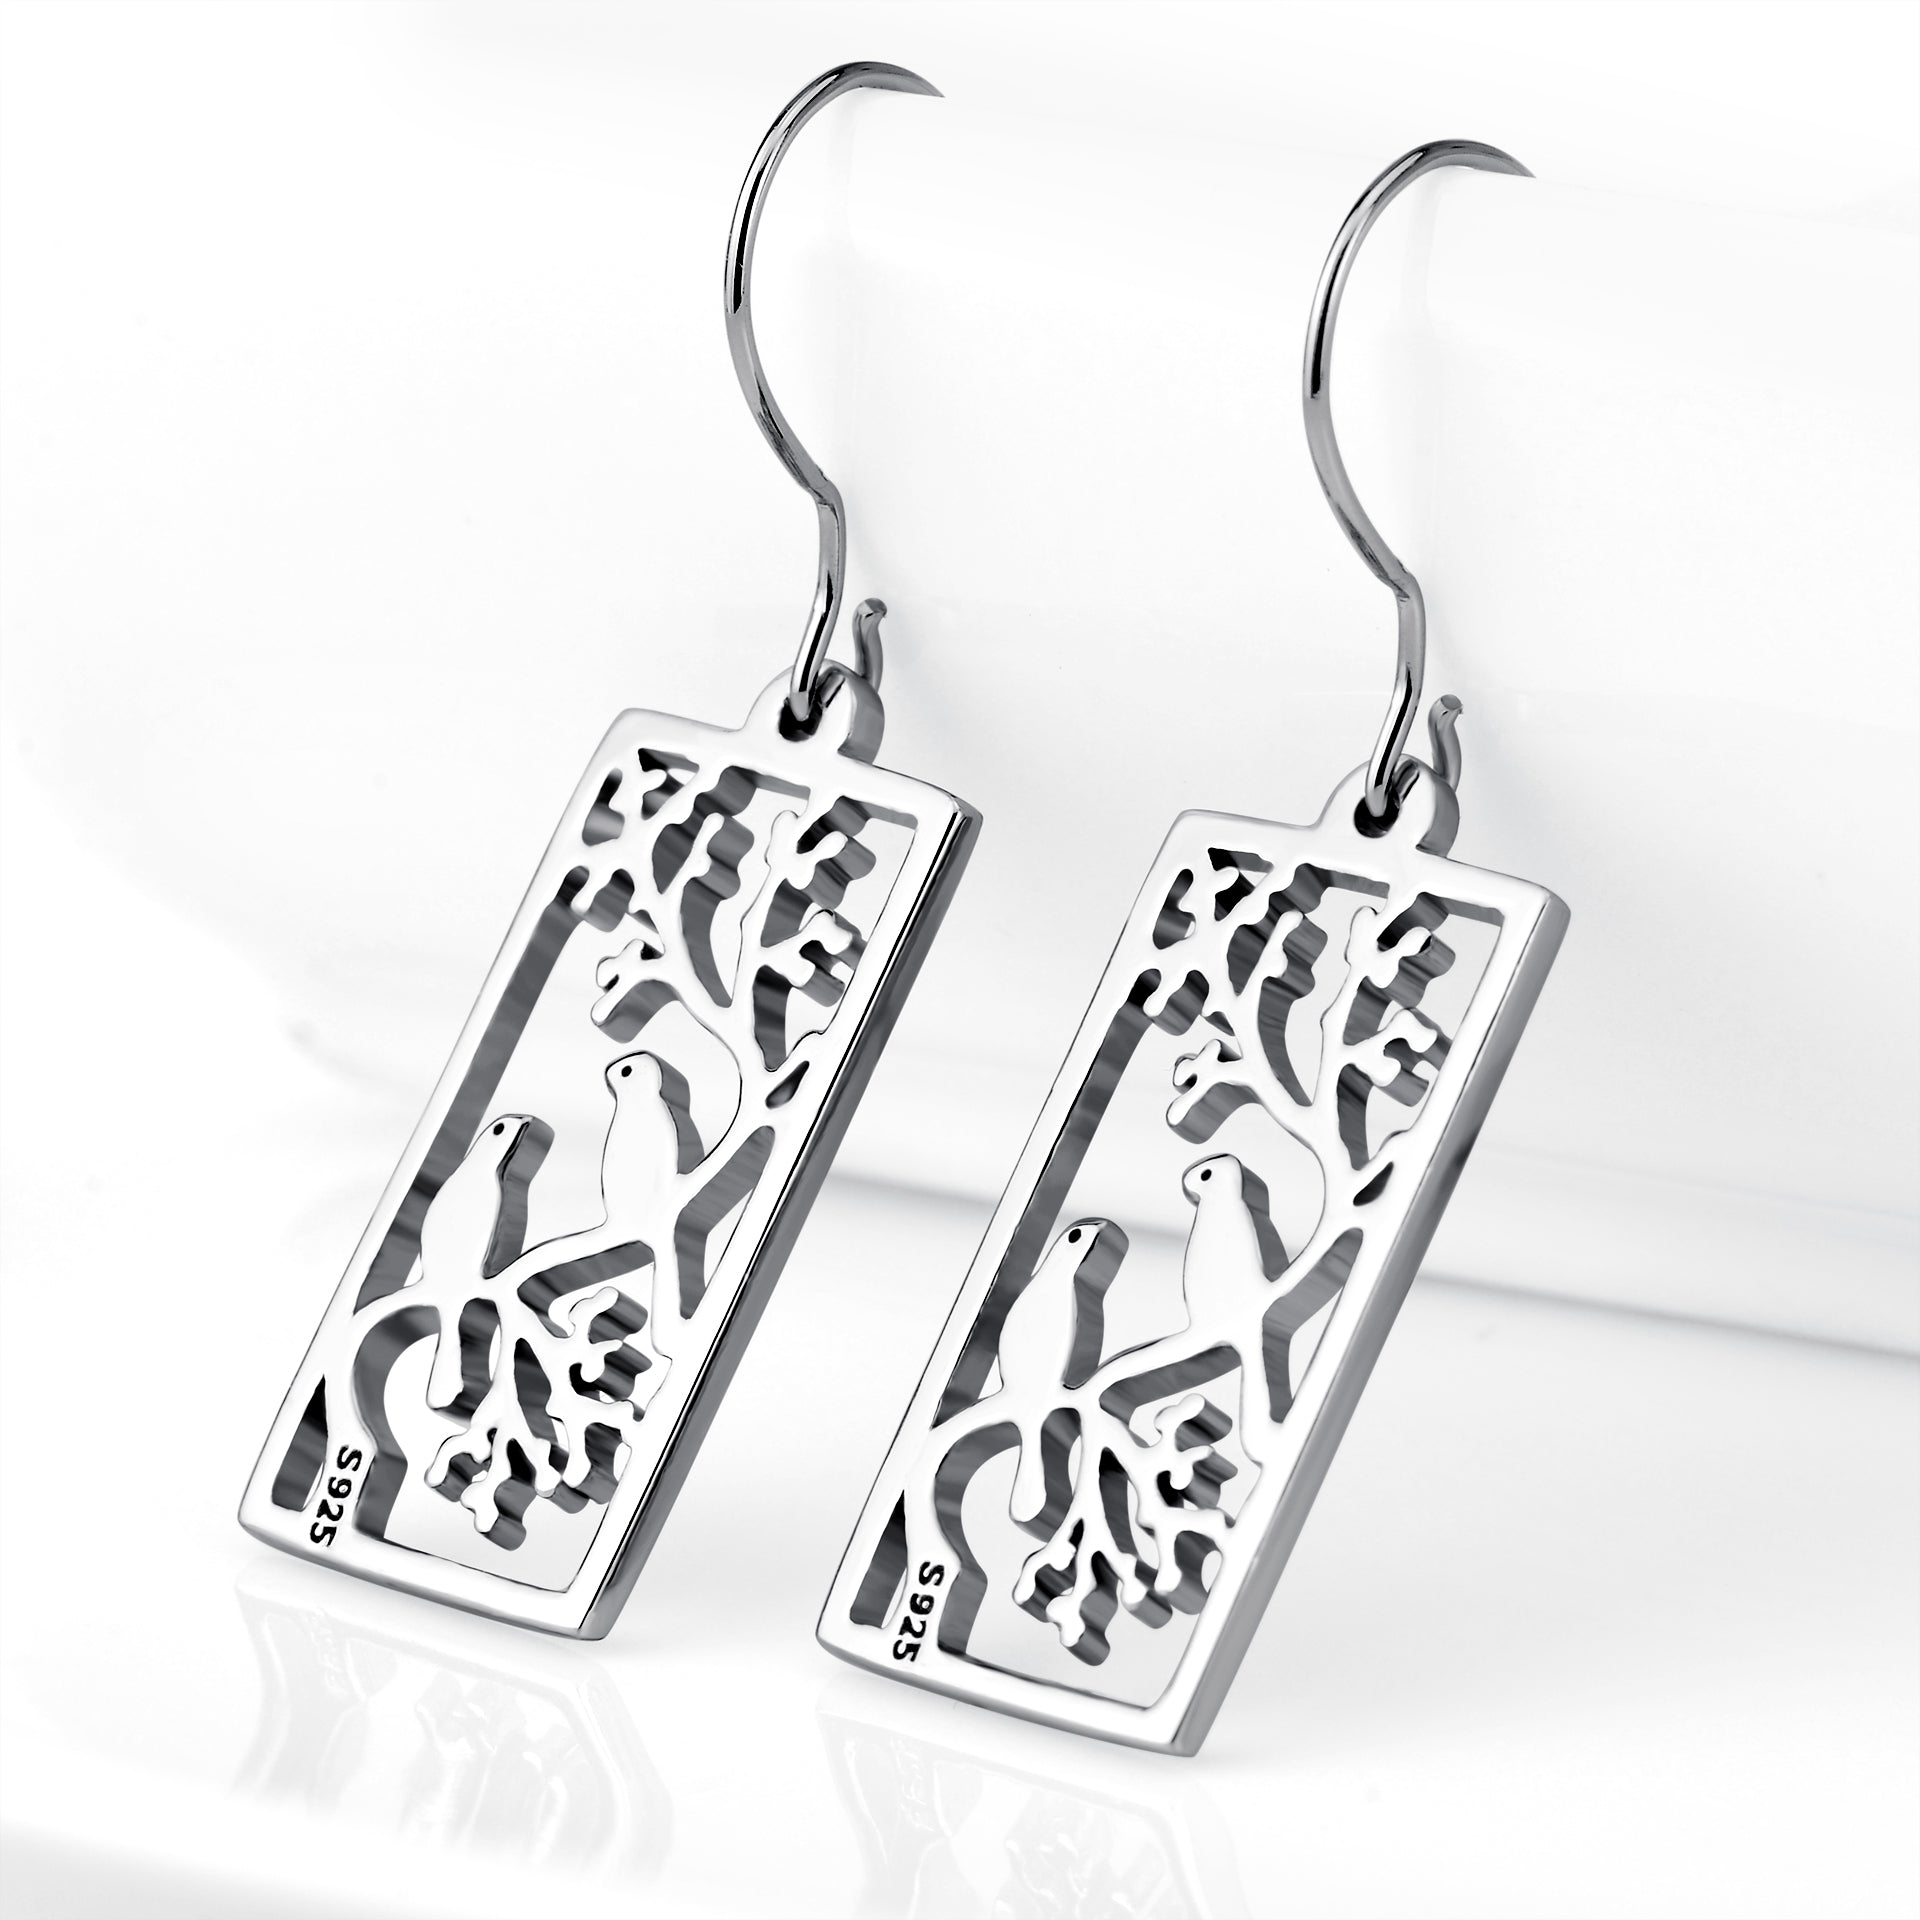 Many birds earring stand on the branches and engrave earrings design